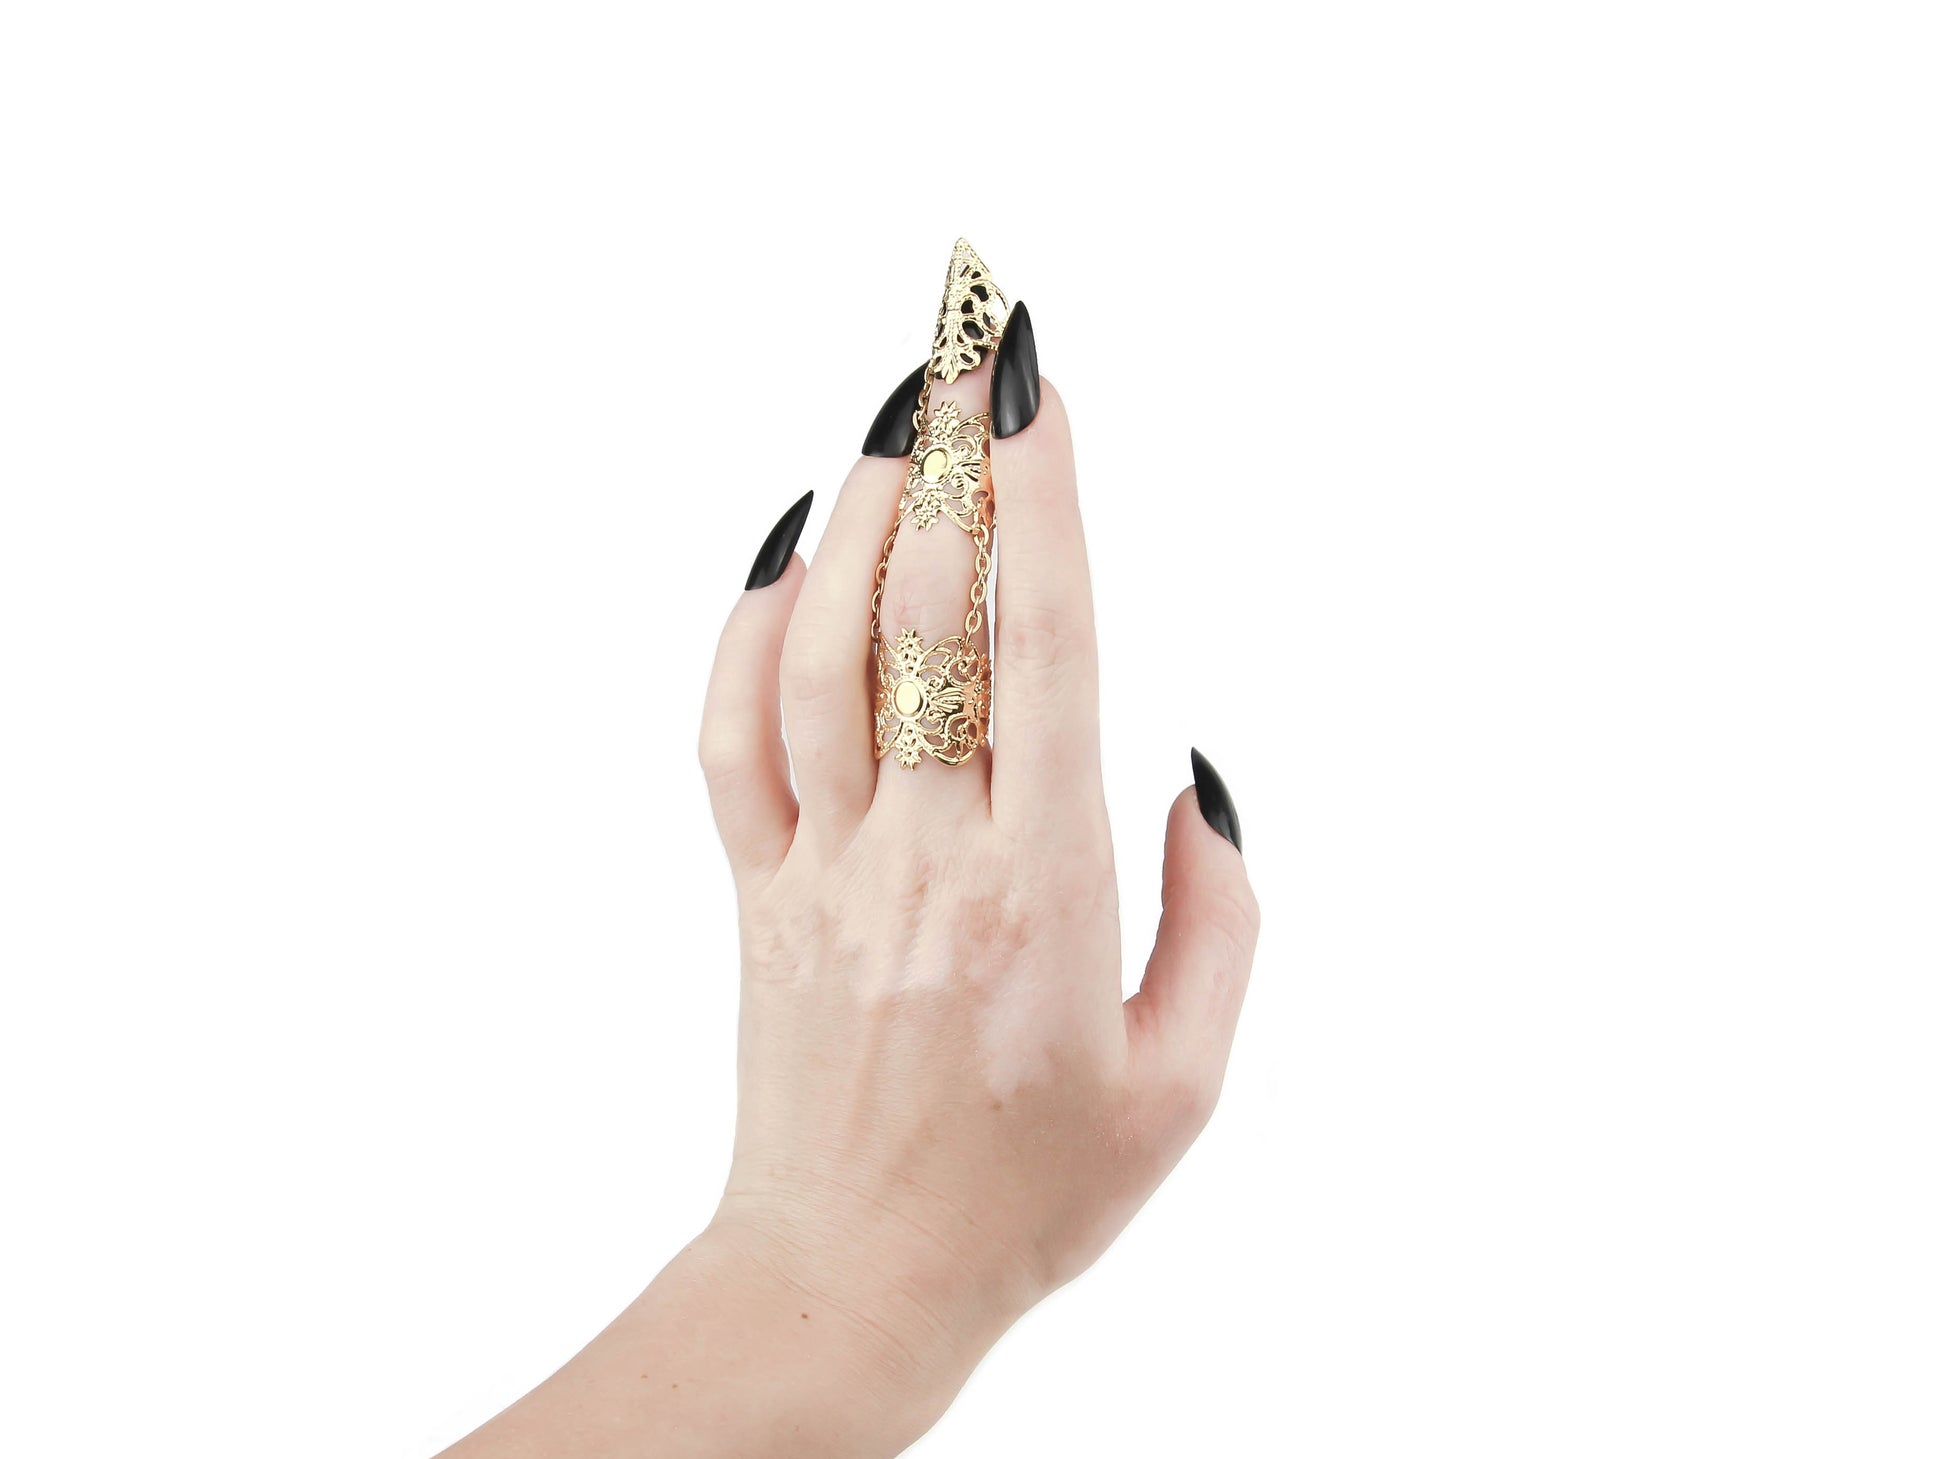 A hand flaunts a striking Myril Jewels gold full finger claw ring, boasting intricate neo-gothic details. Perfect for adding an edgy touch to gothic-chic styles or as a standout accessory for Halloween, this bold jewelry piece is a quintessential addition for anyone embracing a dark avant-garde or witchcore aesthetic